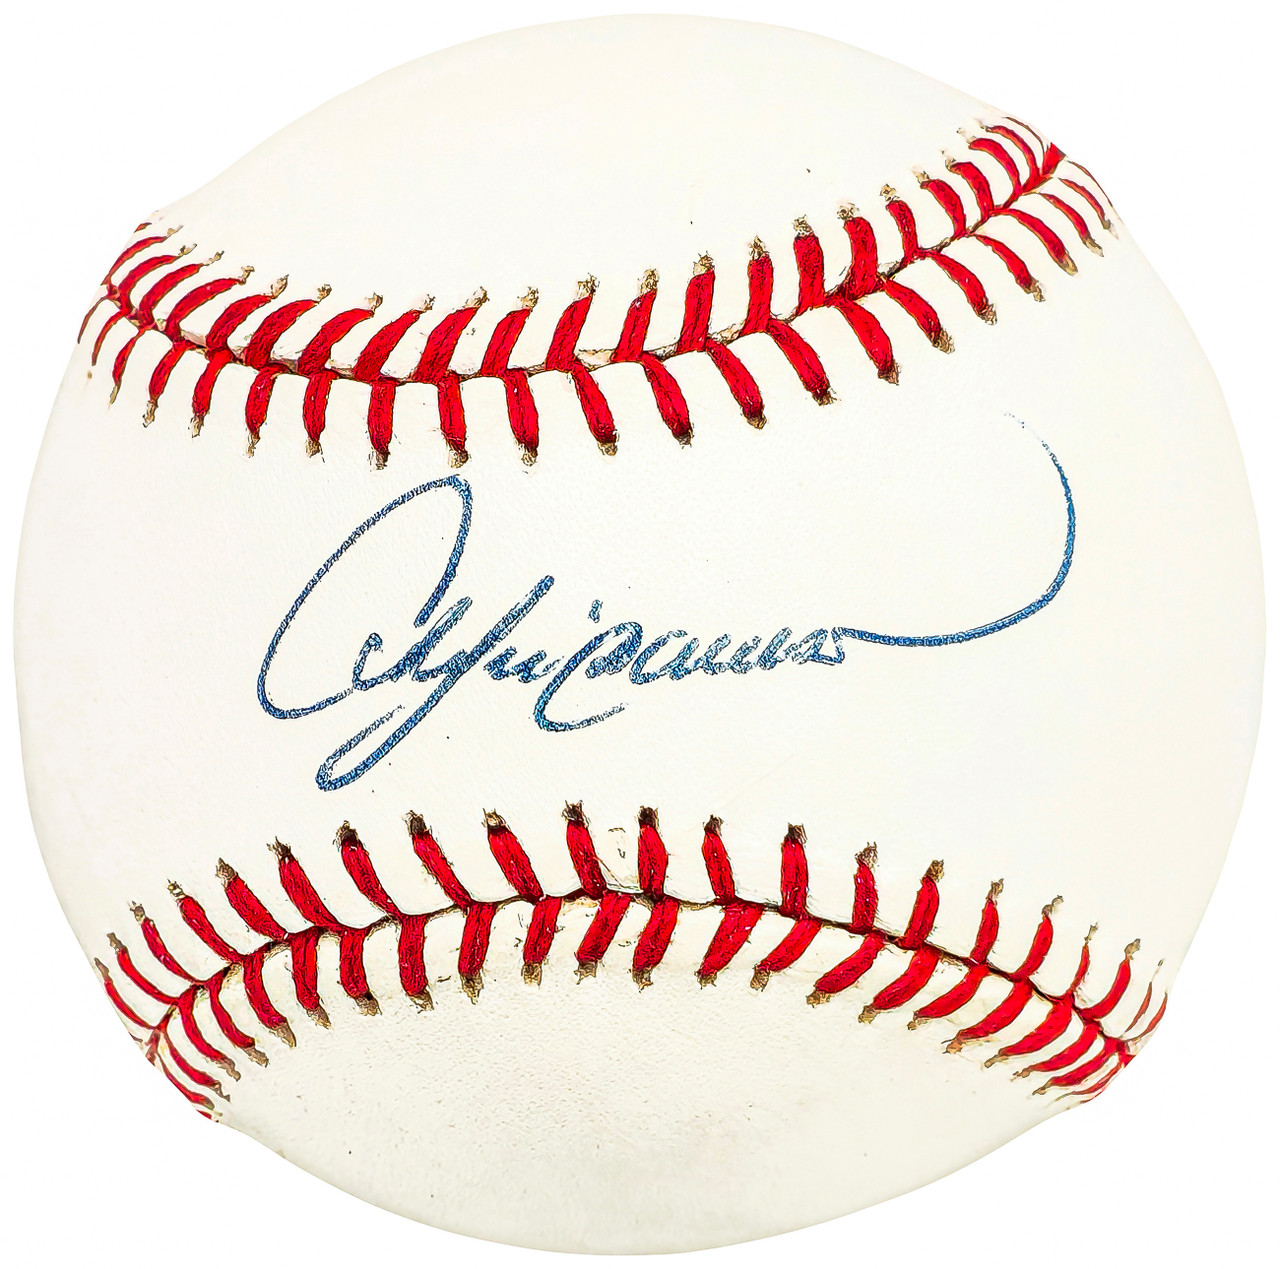 Andre Dawson Autographed Baseball with 77 NL Roy Inscription